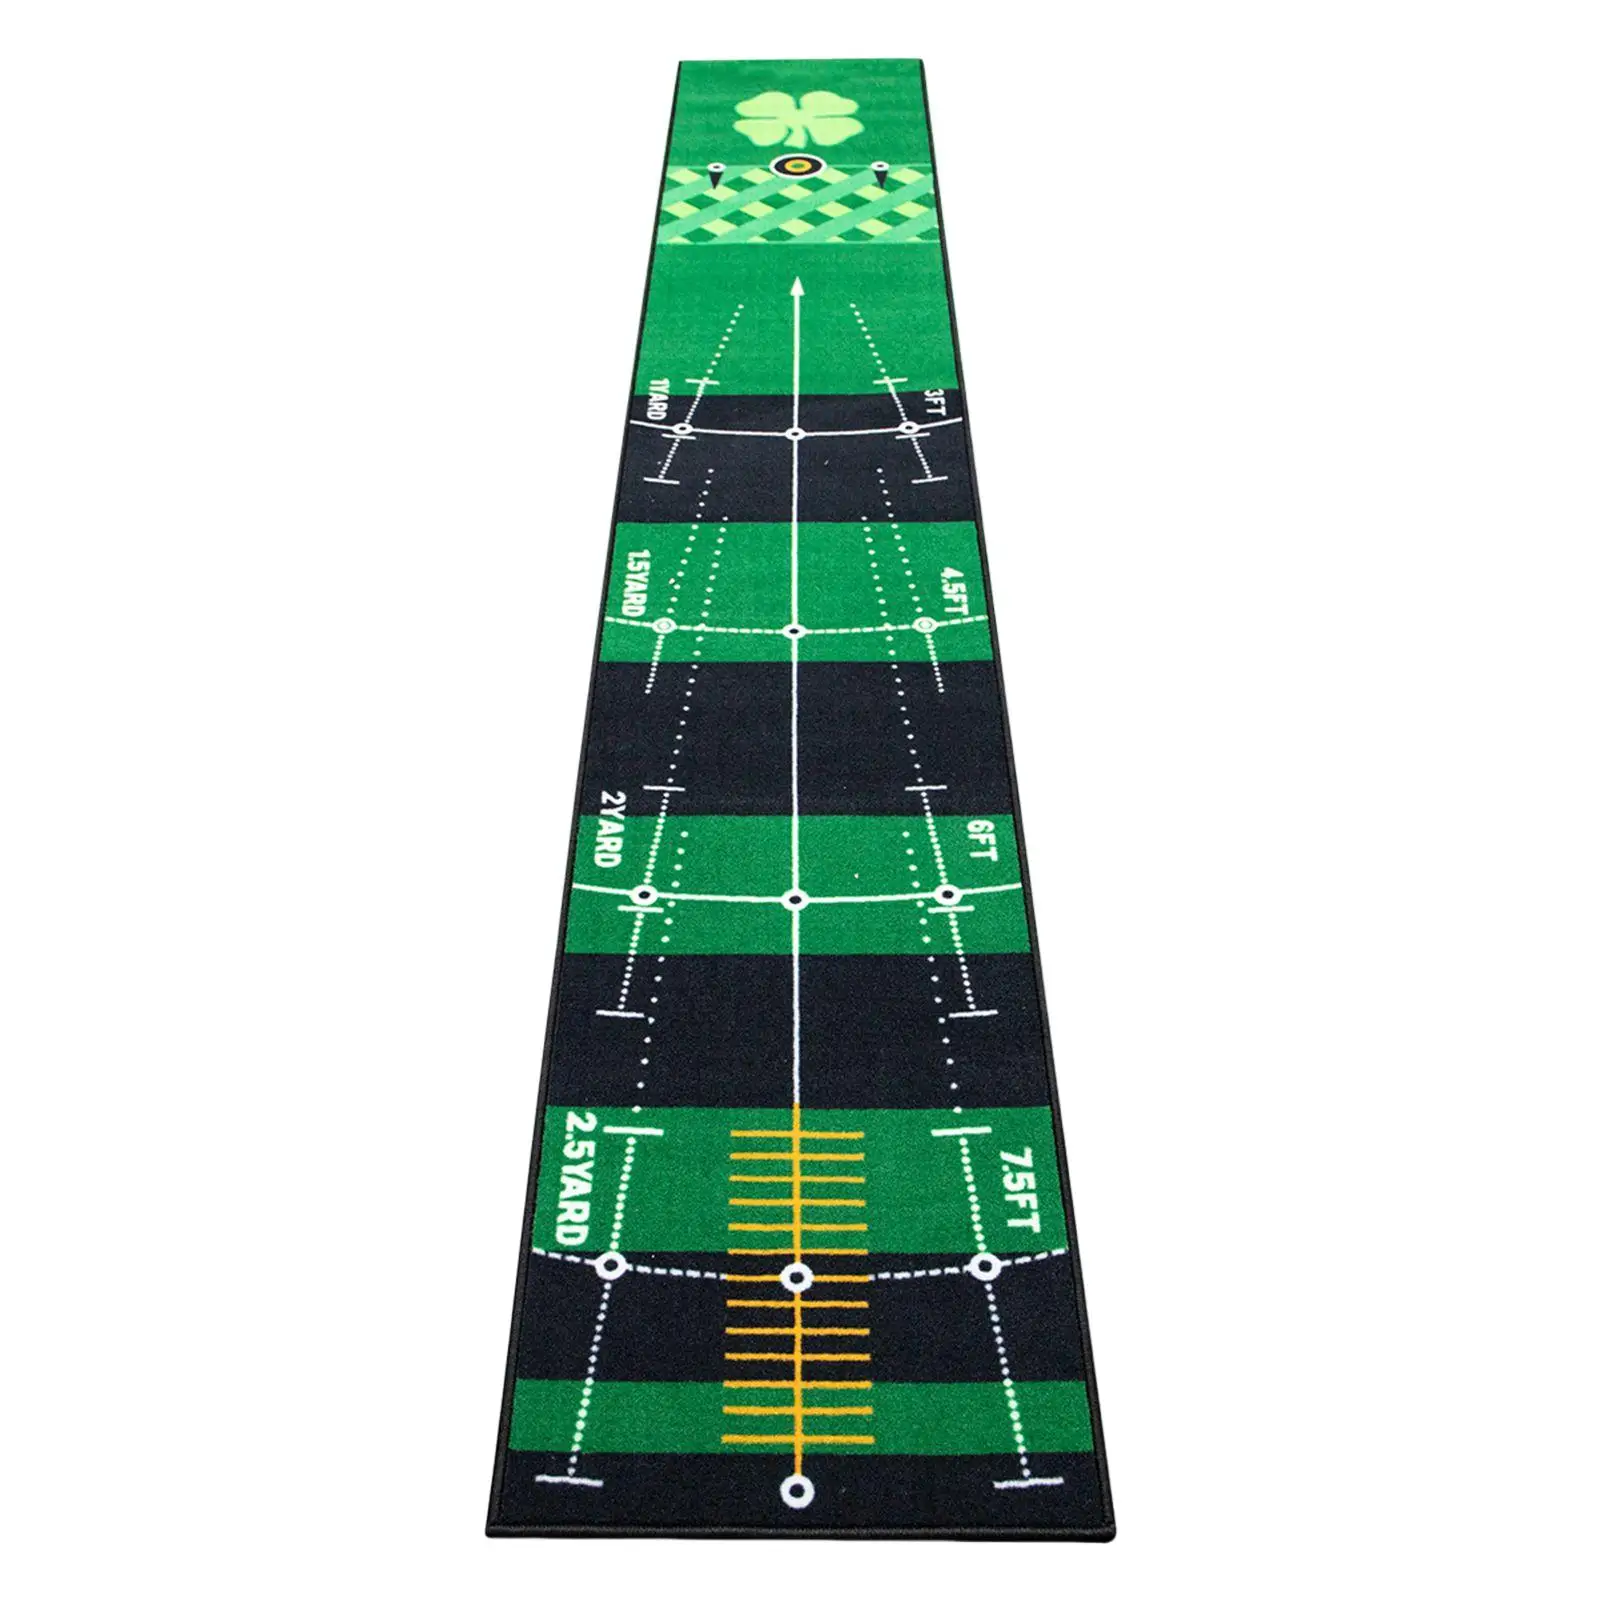 Golf Putting Mat Portable Indoor Putting Green Practice Training Aid for Home